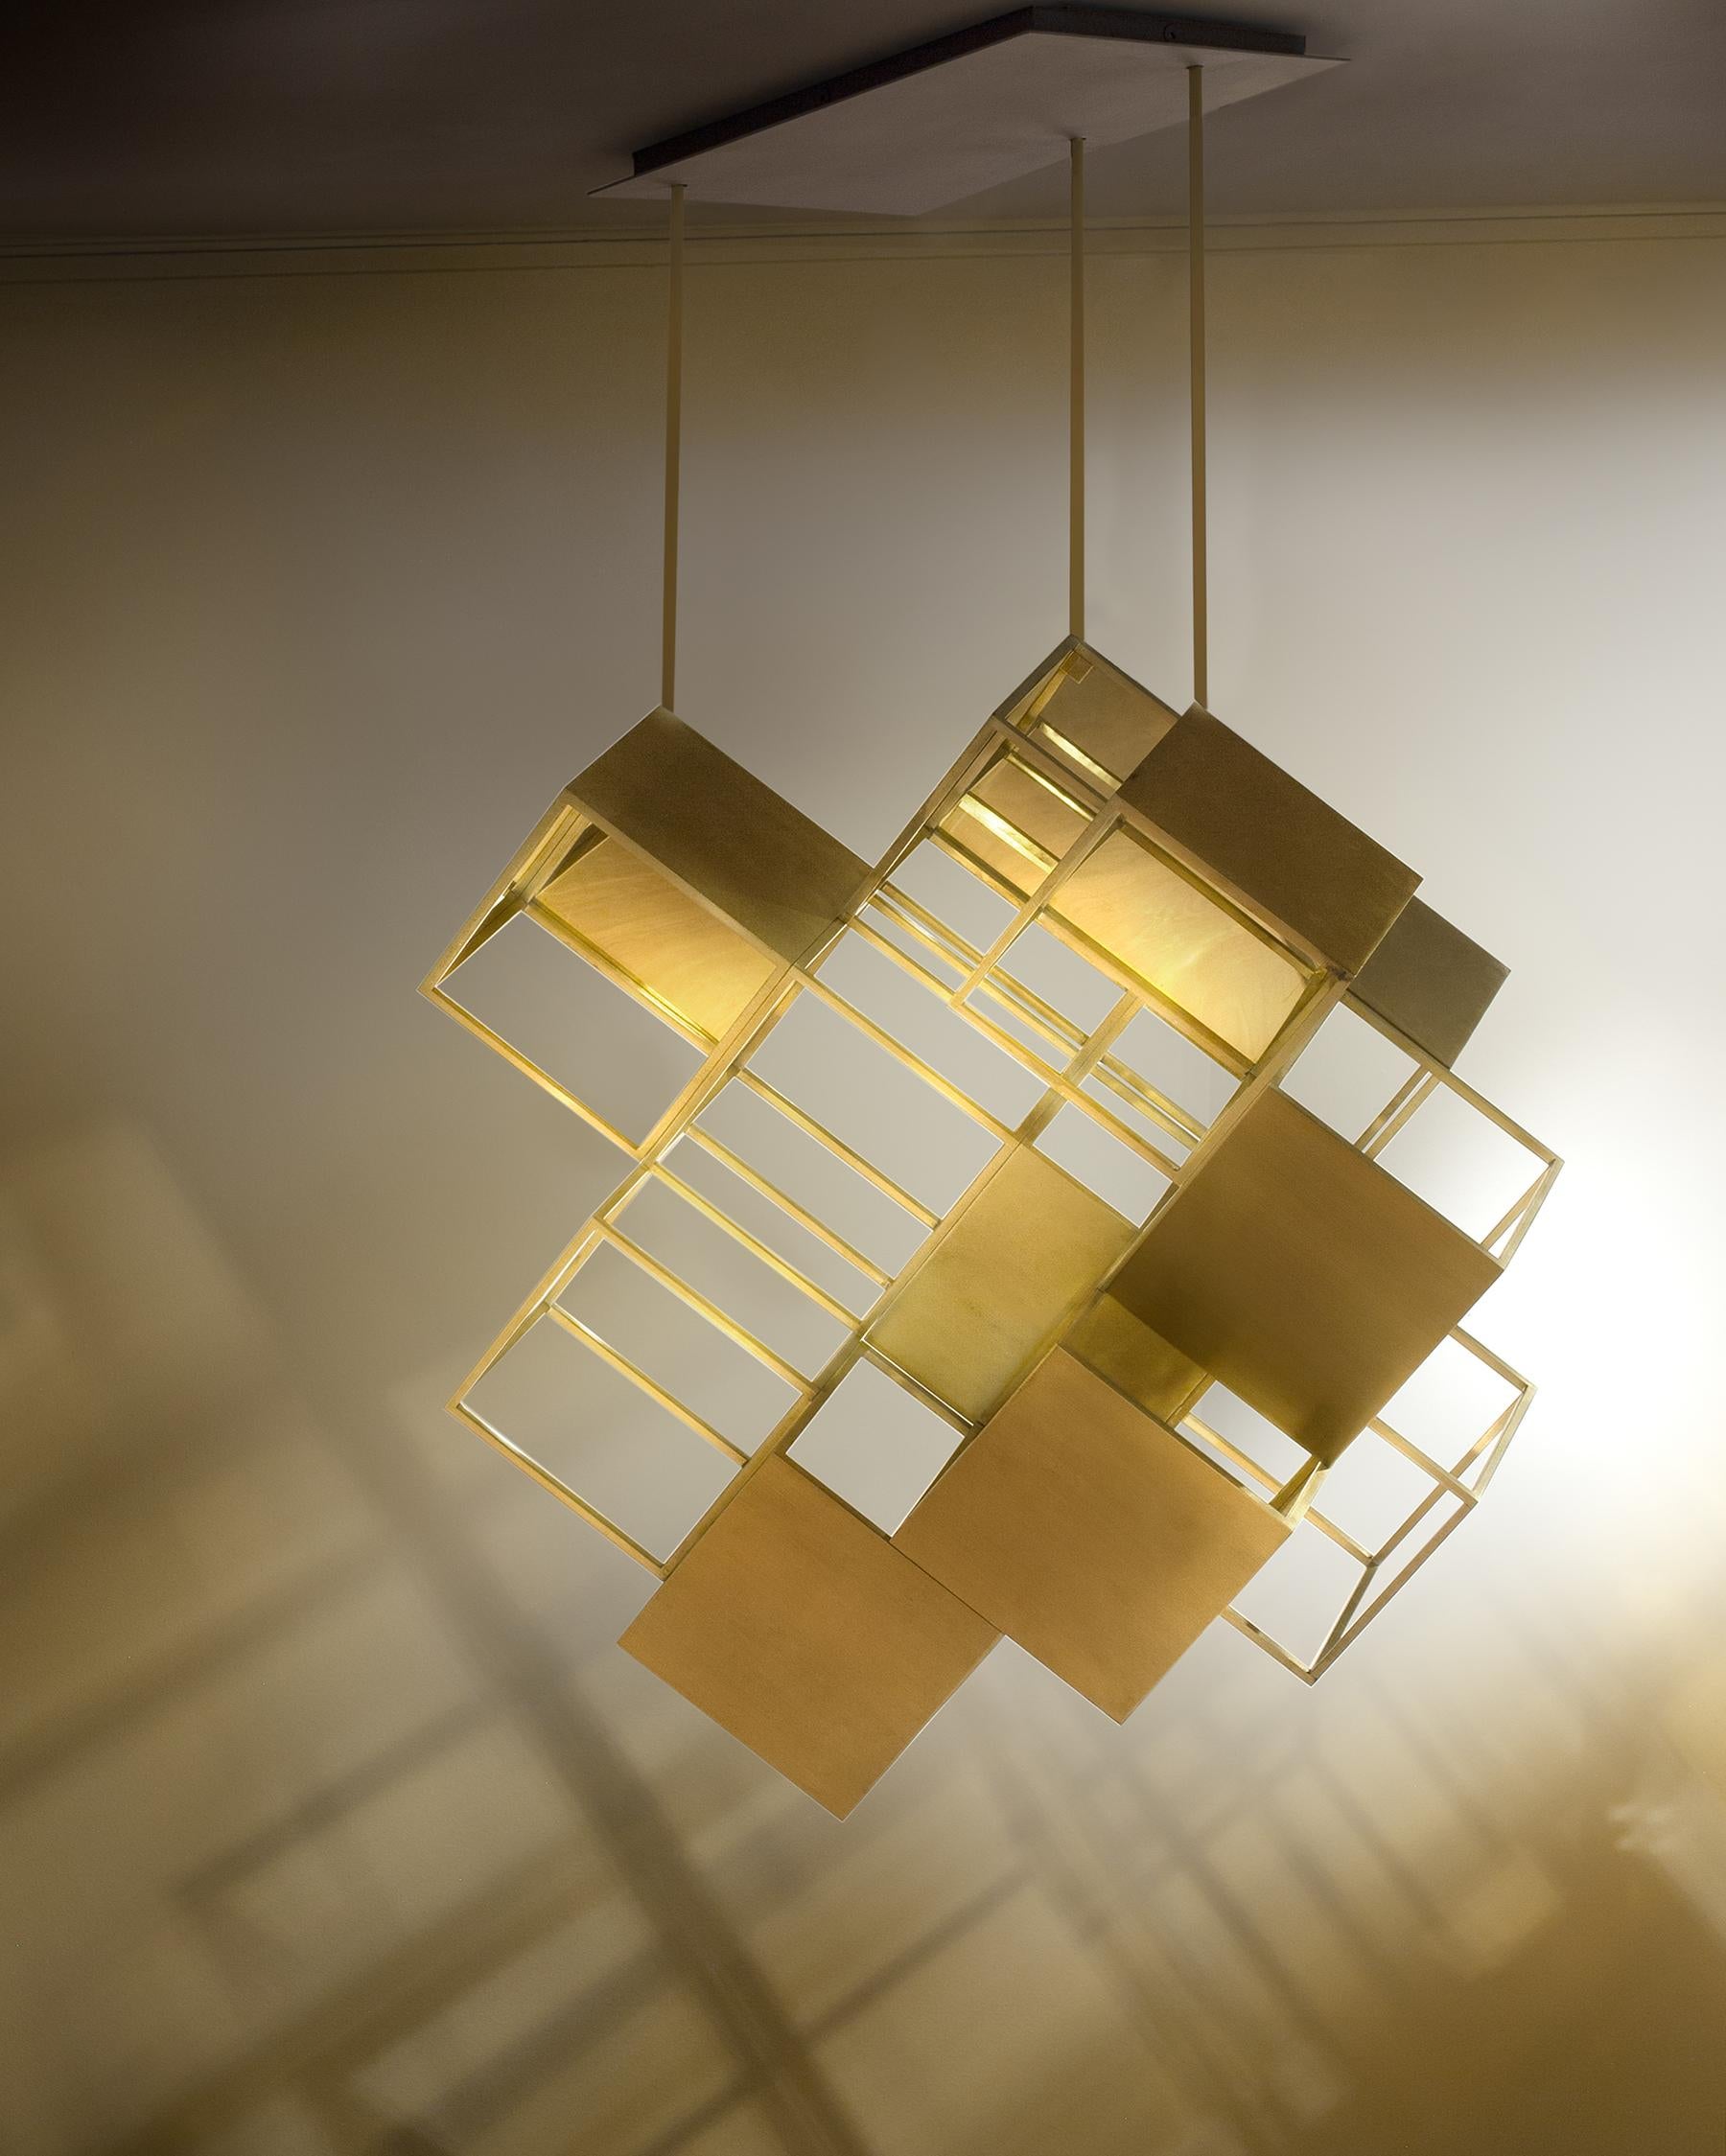 Brushed Lattis 11 Chandelier Lighting Brass by Diaphan Studio, REP by Tuleste Factory For Sale